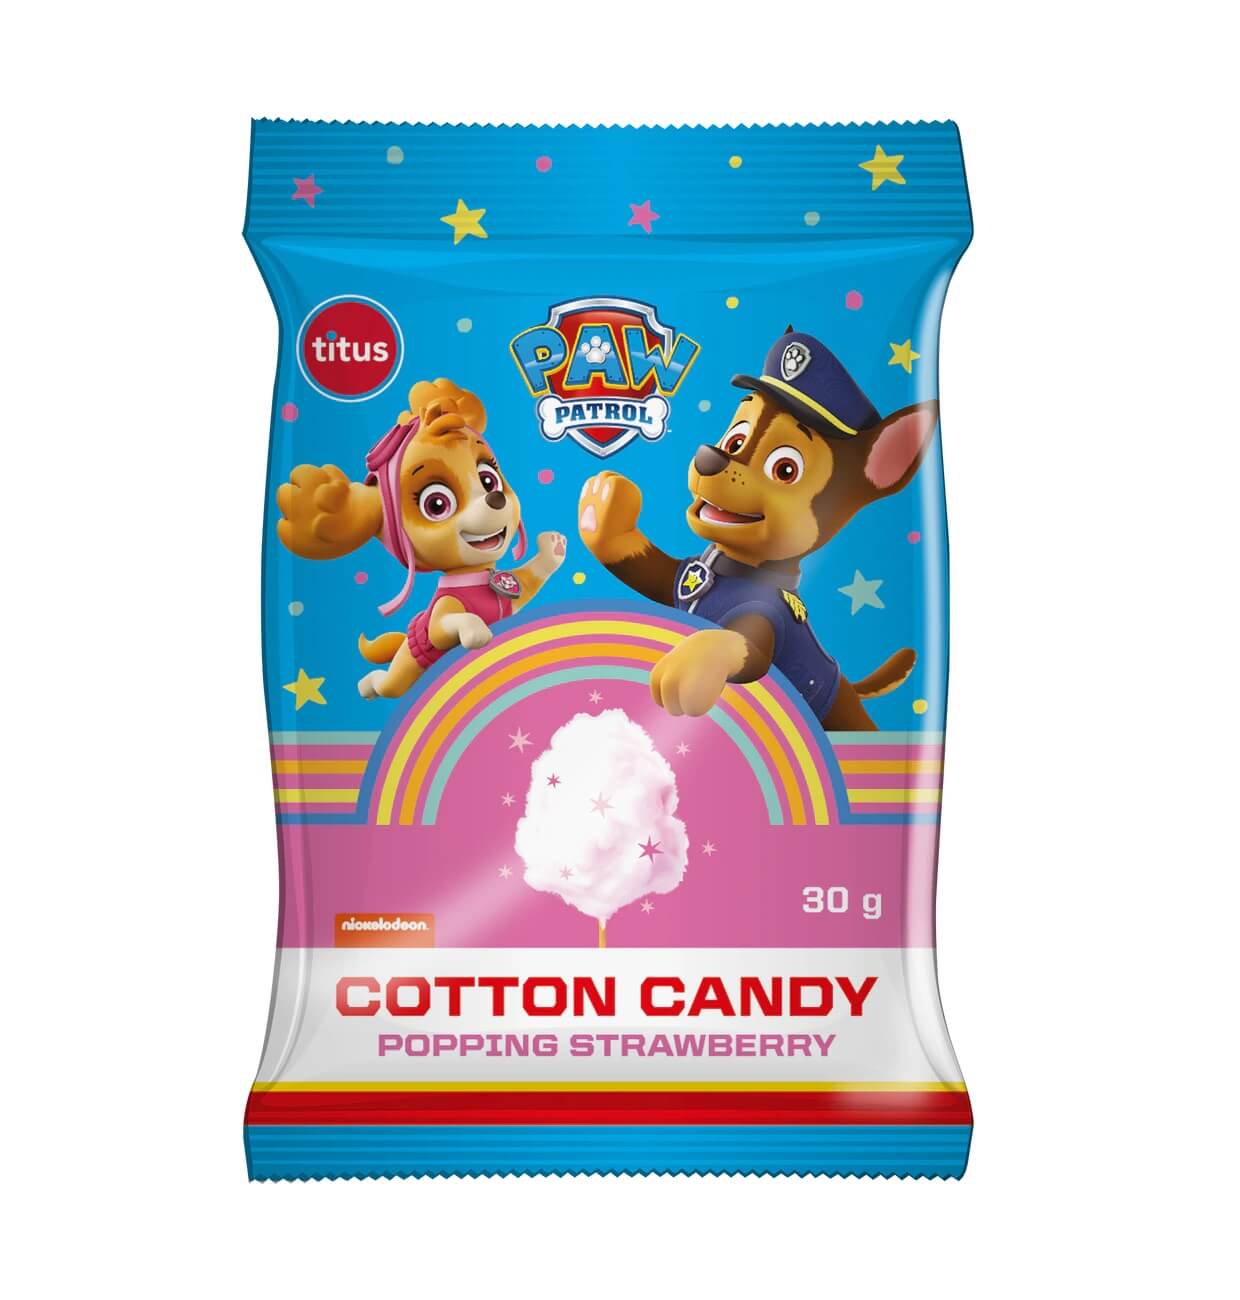 Paw Patrol Cotton Candy Popping Strawberry 30g